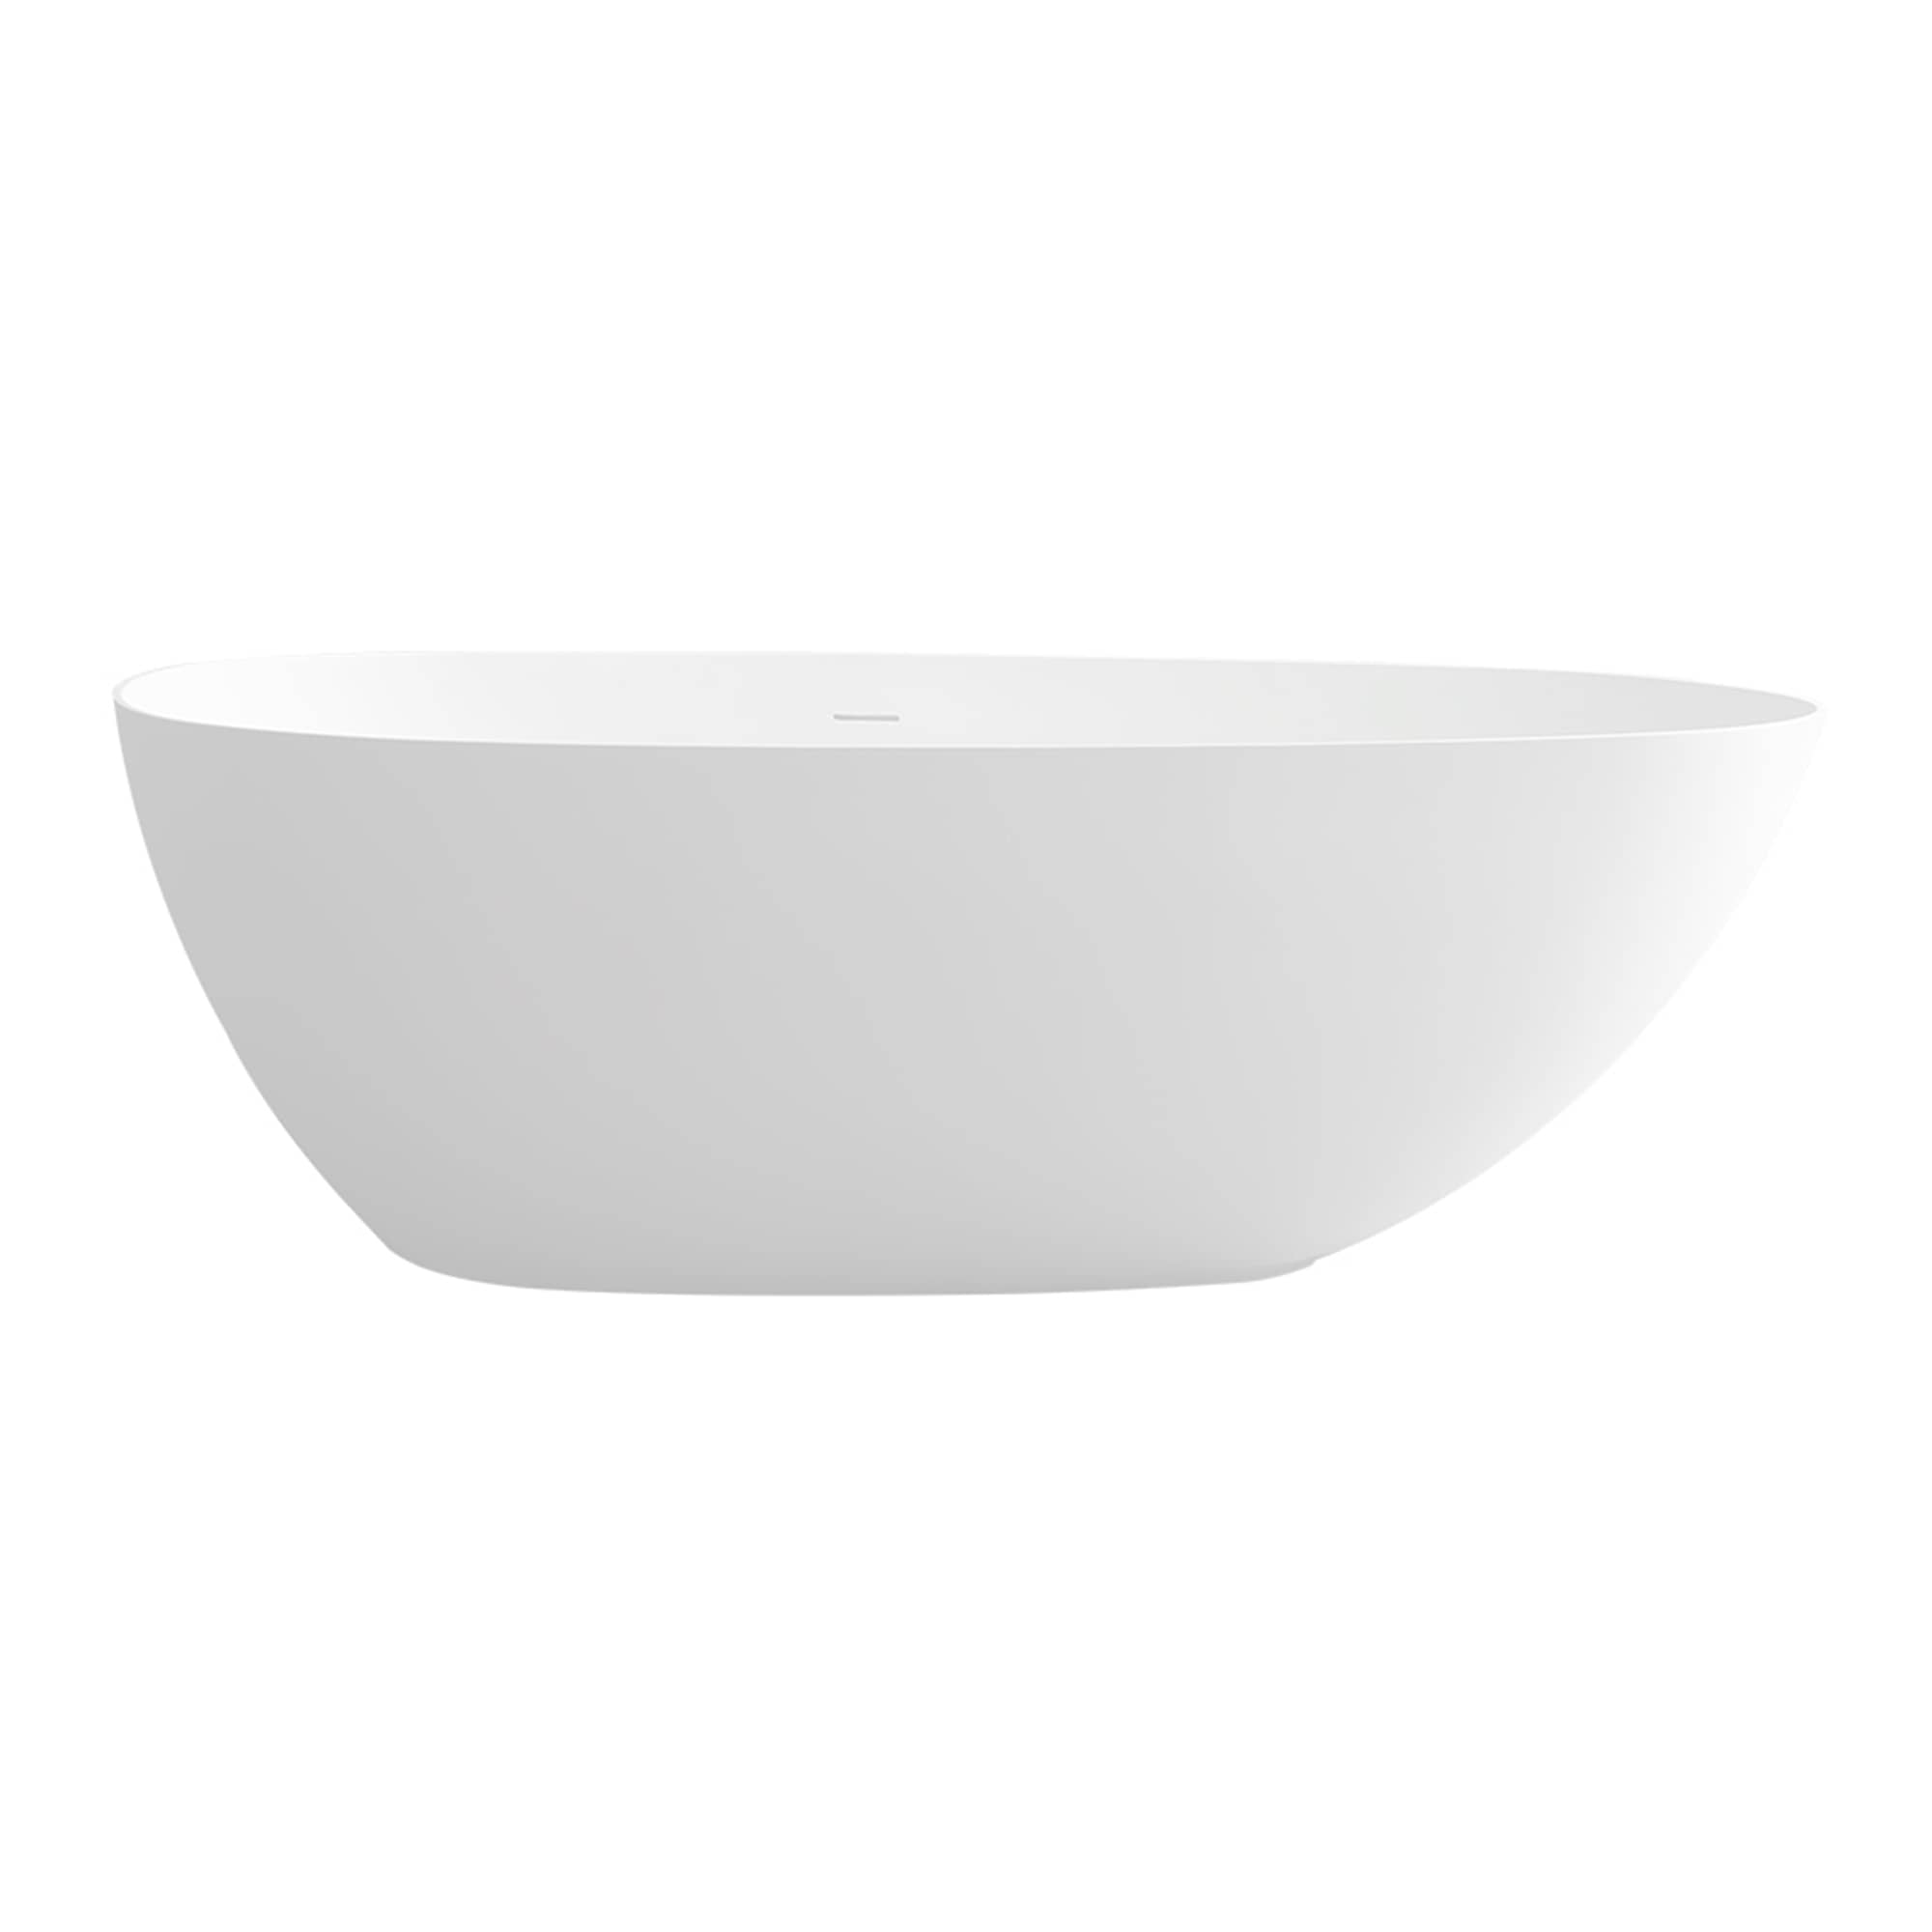 59/63/67/71“ Stone Resin Bathtubs, Contemporary Designs for Oval Shaped Composite Flatbottom Tubs in White, Ultimate Tubs Collection with Free-Standing Design and Durable Material Base